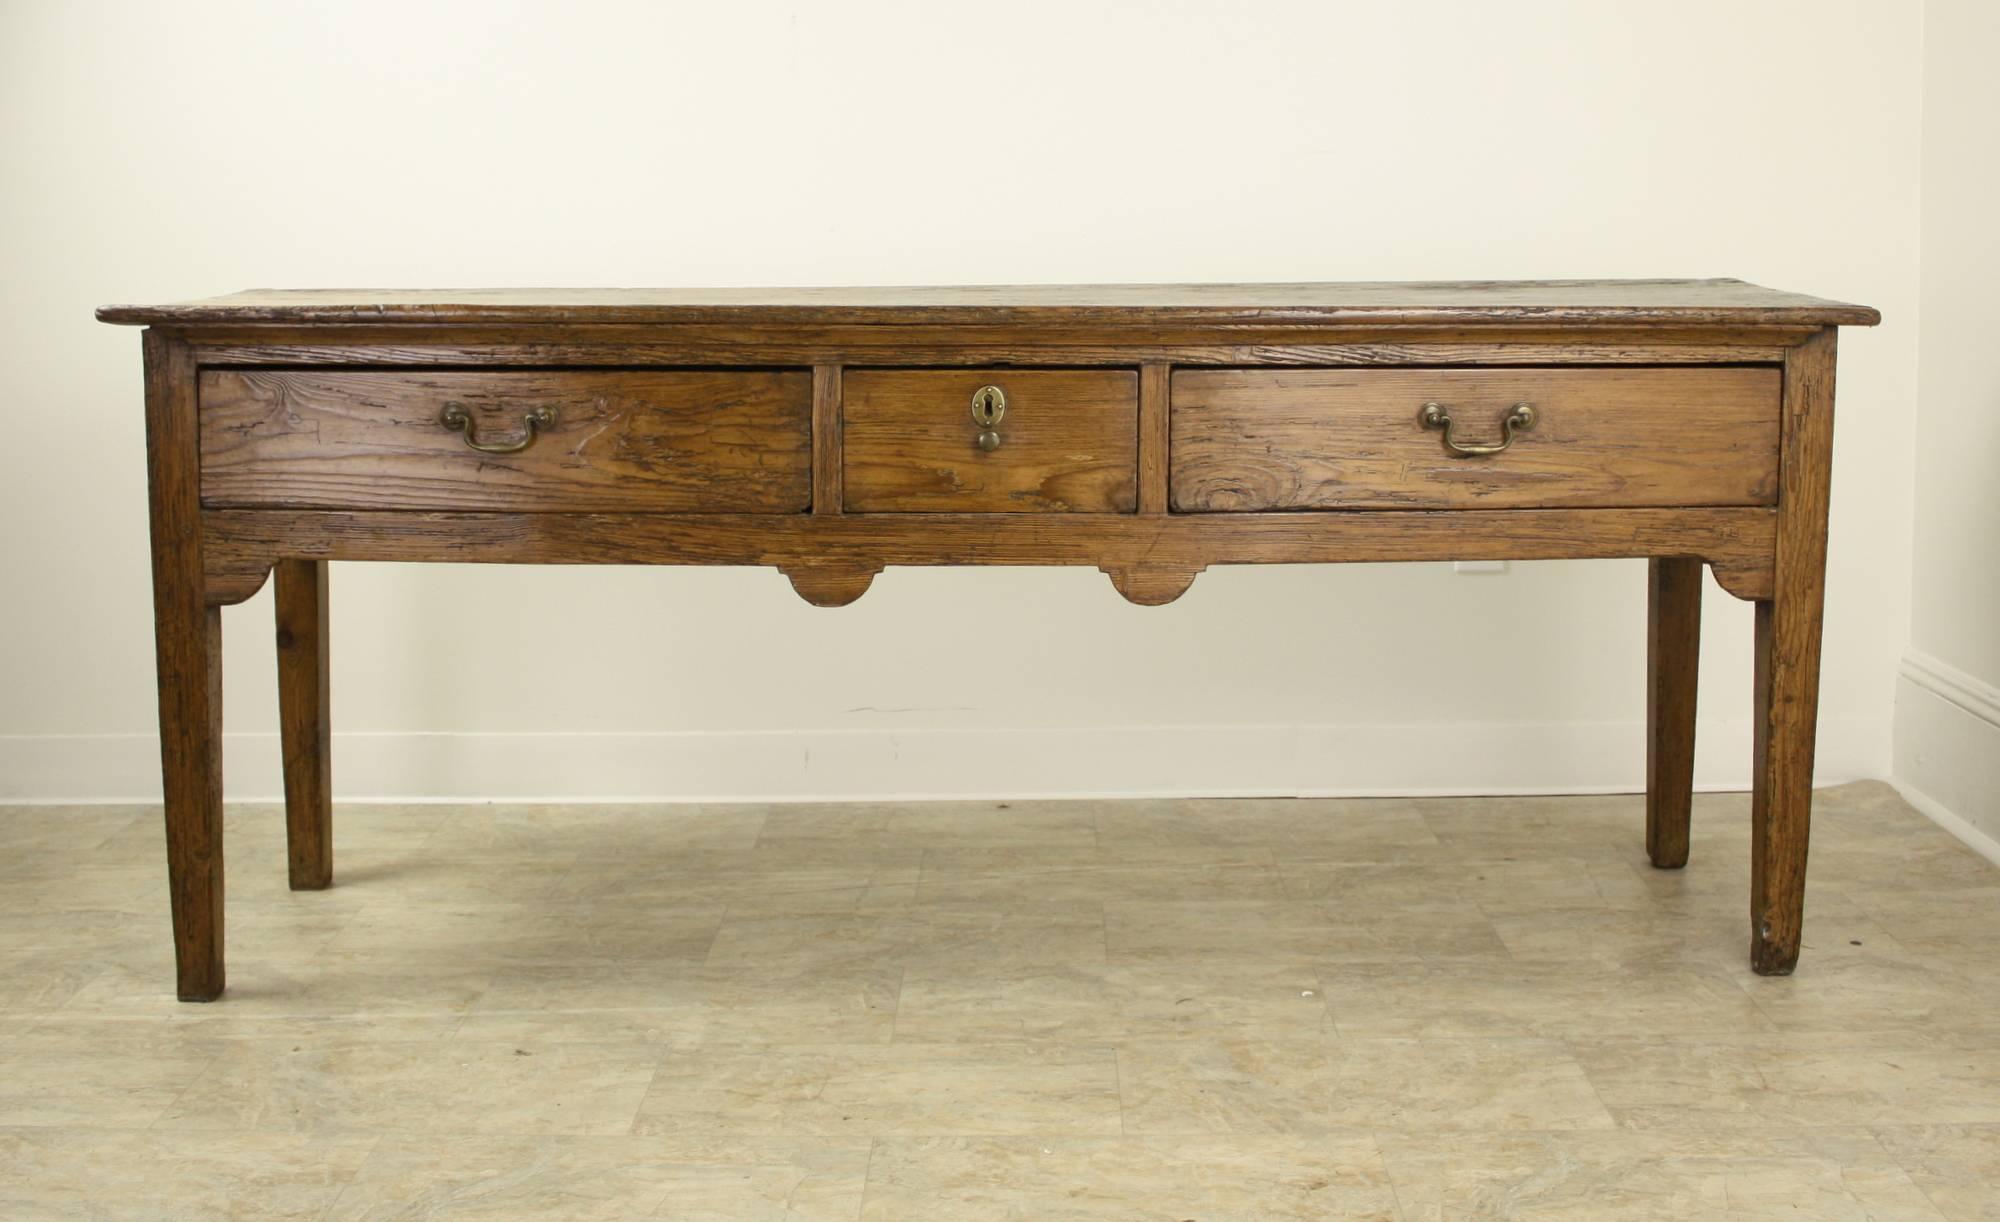 A handsome long pine console or sideboard with wonderful honey color and patina highlighted by exceptional grain.  The charming carved apron completes the look.  30